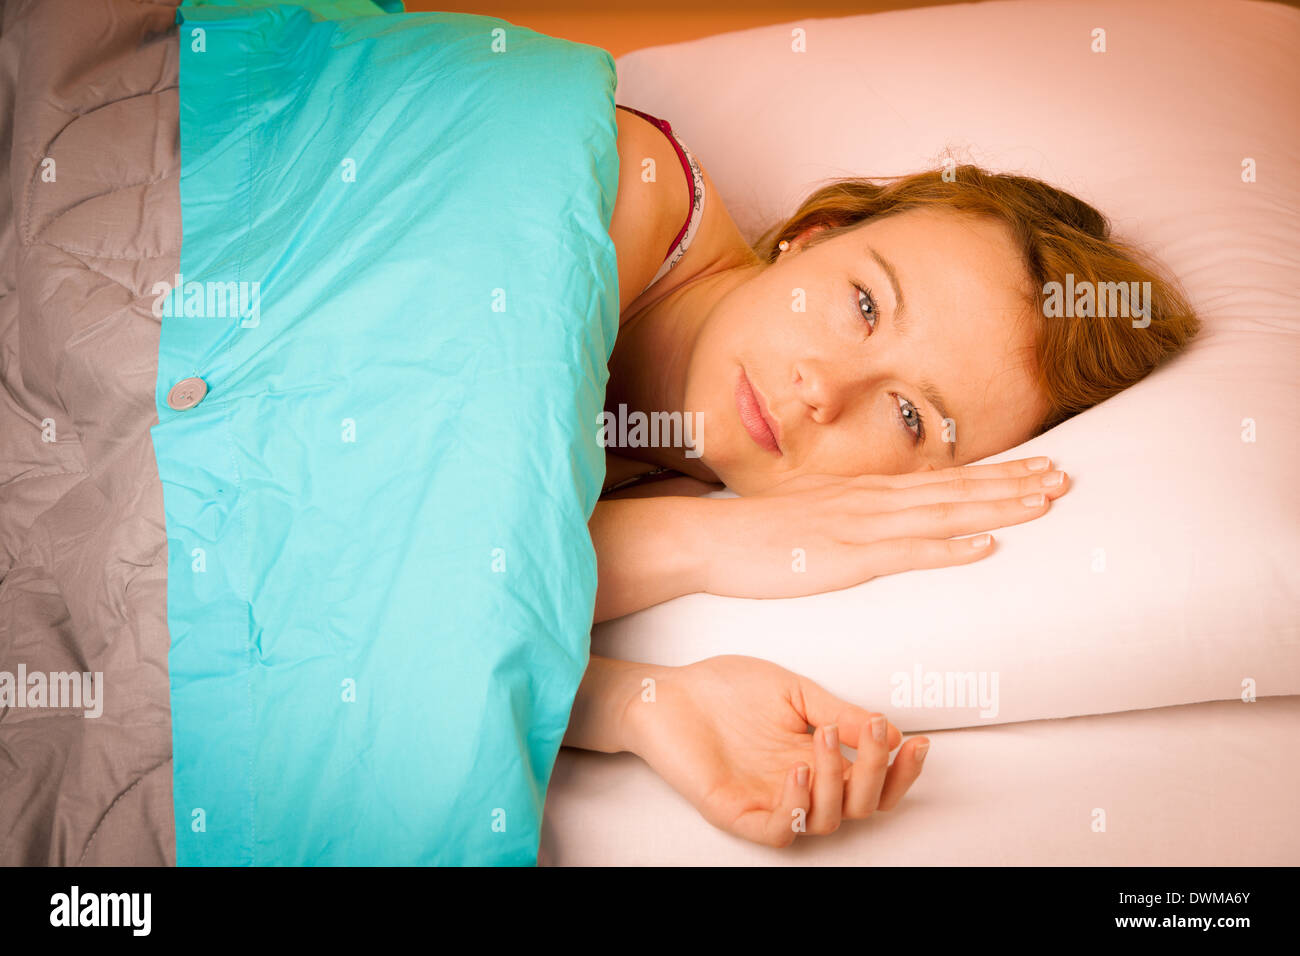 Woman lying on pillow in bed, covered with blue blanket Stock Photo